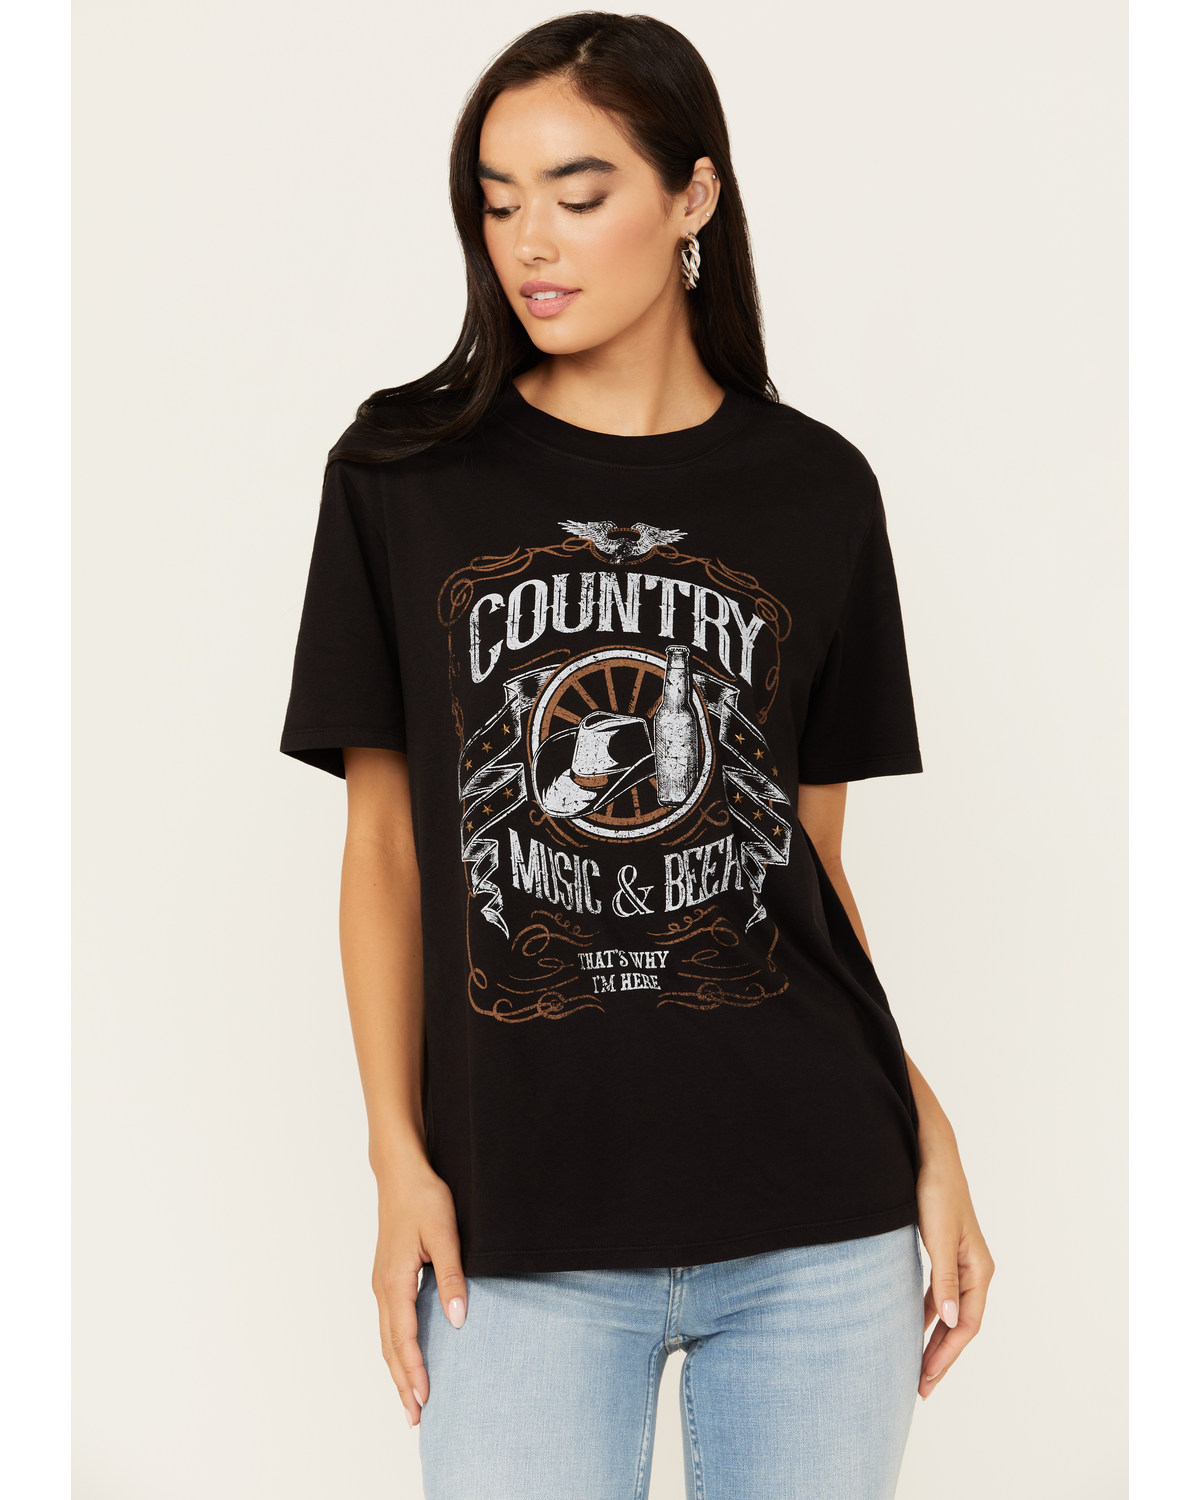 Idyllwind Women's Helen Country Music and Beer Short Sleeve Graphic Tee